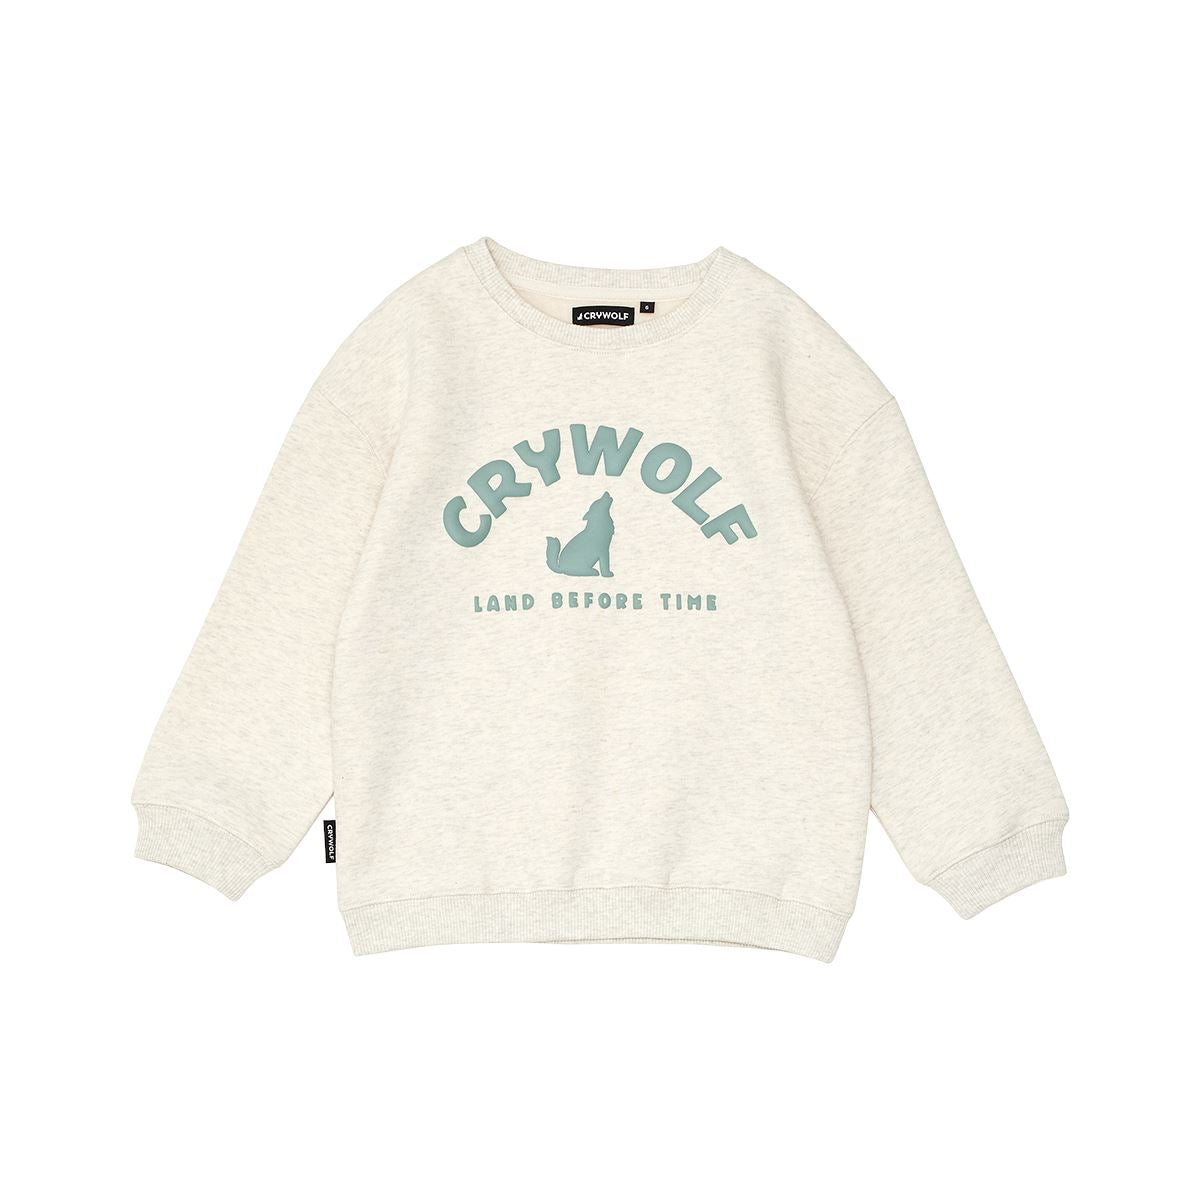 Crywolf Chill Sweater - Oatmeal Jumper Crywolf 